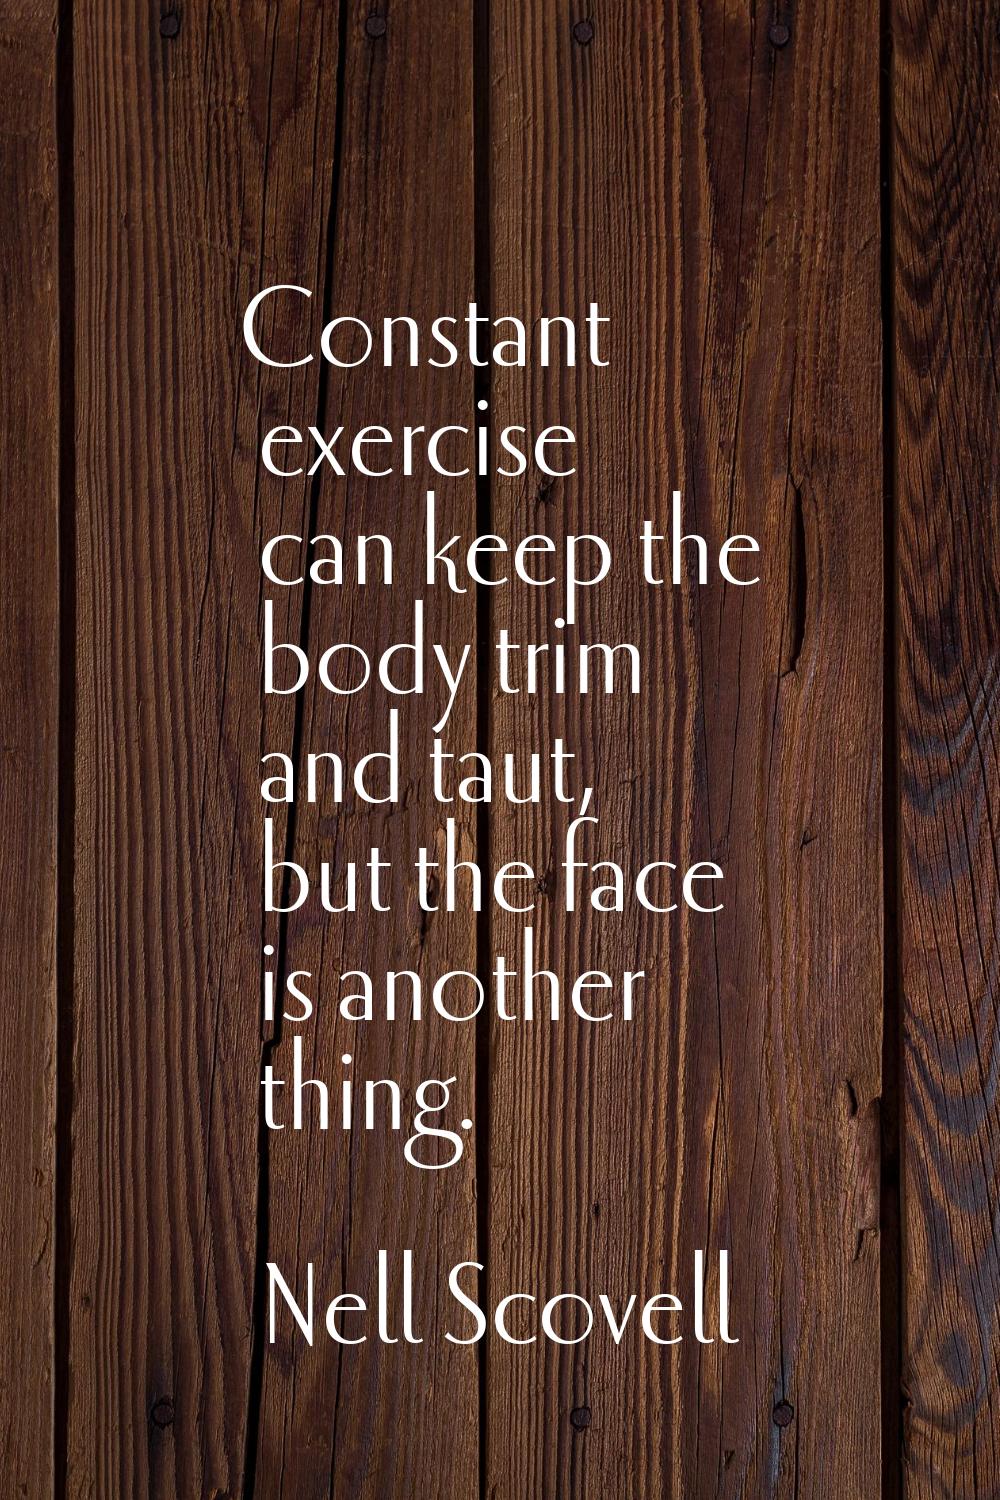 Constant exercise can keep the body trim and taut, but the face is another thing.